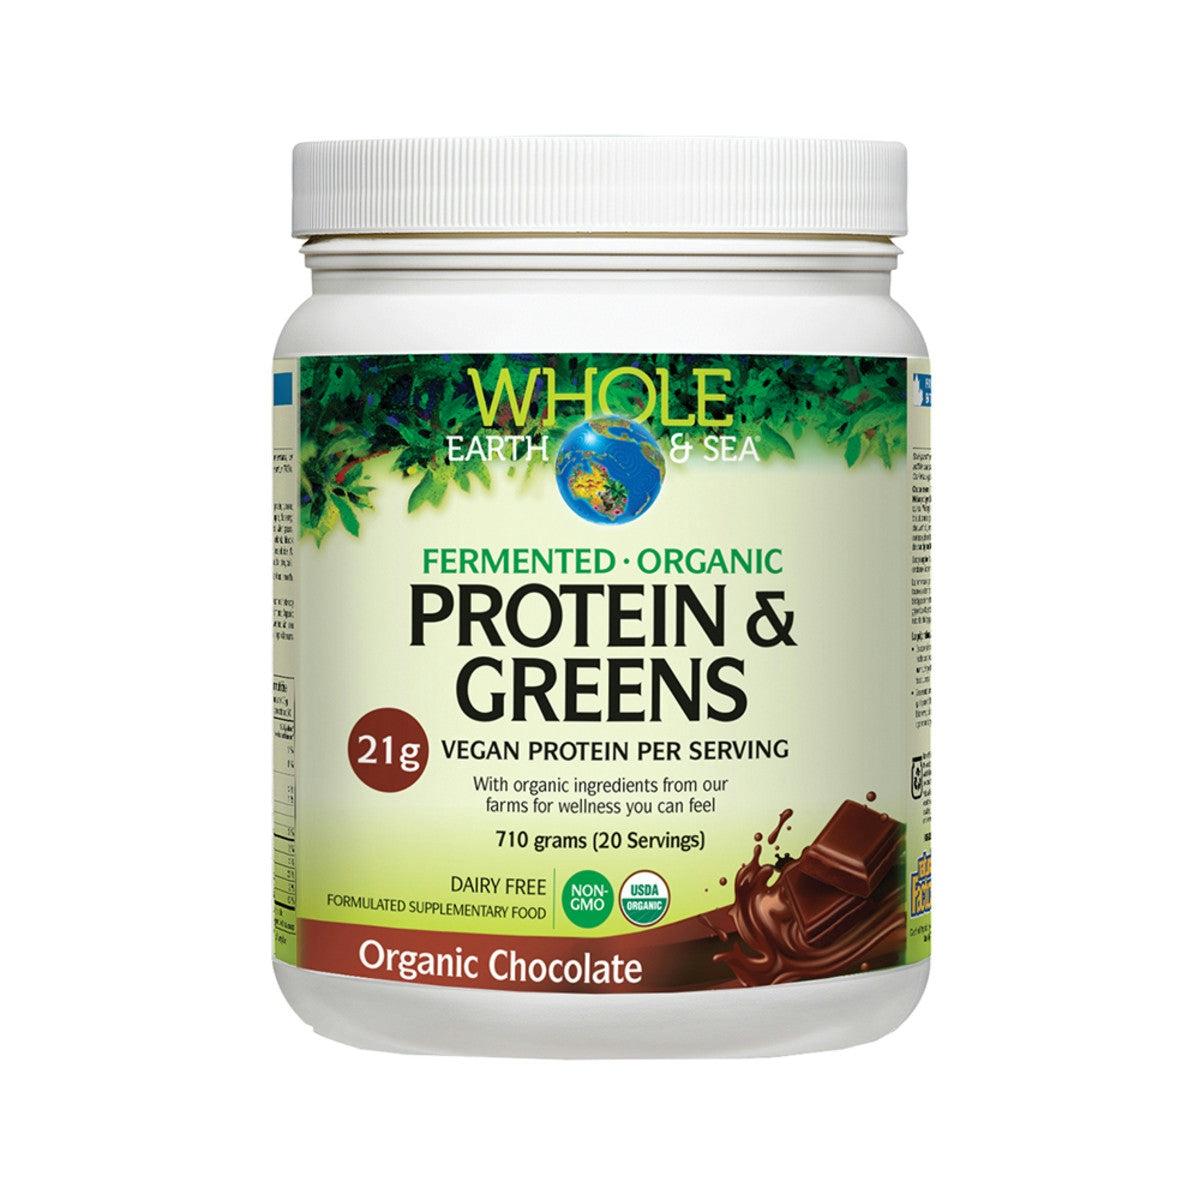 image of Whole Earth & Sea Protein & Greens Organic Chocolate 710g on white background 